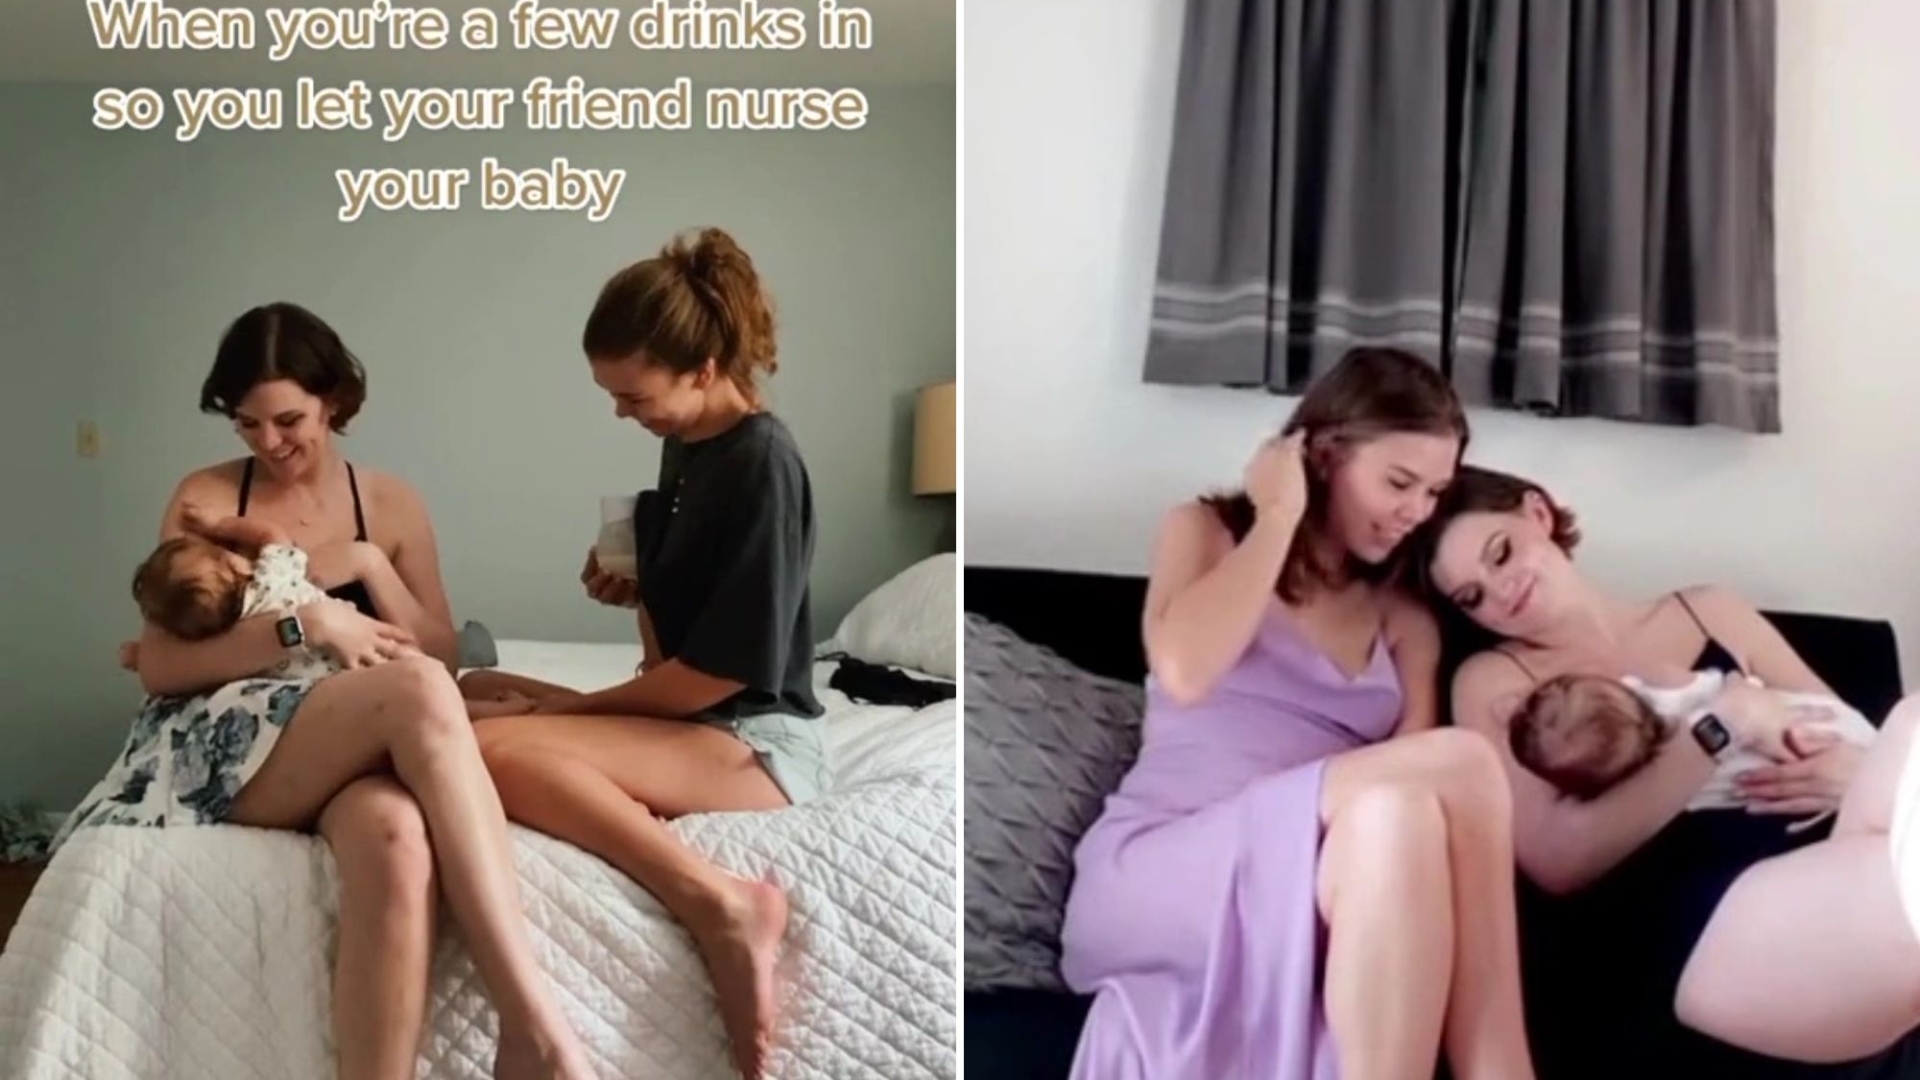 I let my friend breastfeed my baby so I can have a few drinks – people think it’s weird but I don’t care